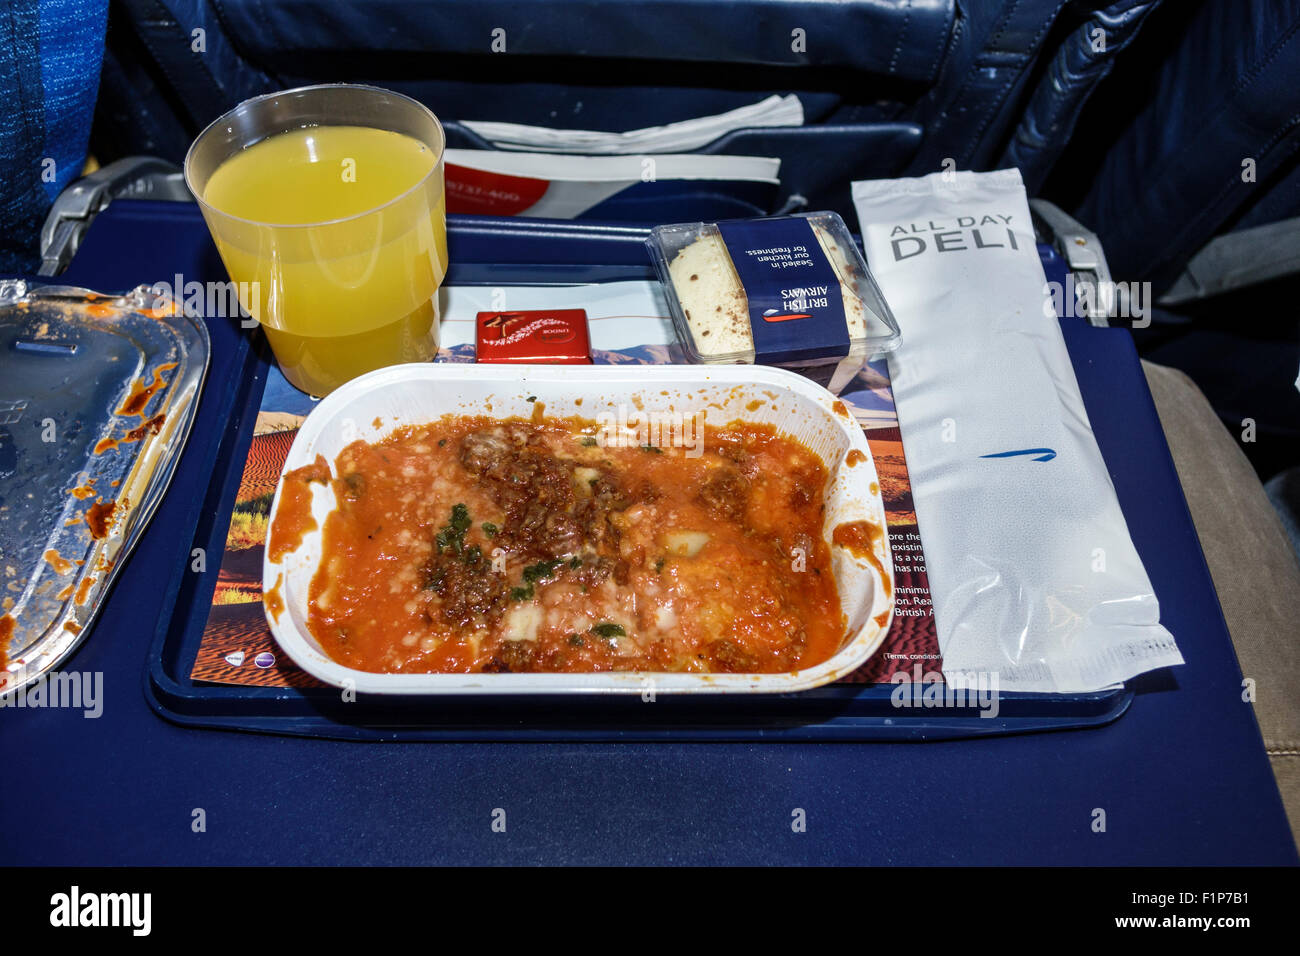 Cape Town South Africa,International Airport,CPT,interior inside,onboard,British Airways,commercial airliner airplane plane aircraft aeroplane,aeropla Stock Photo